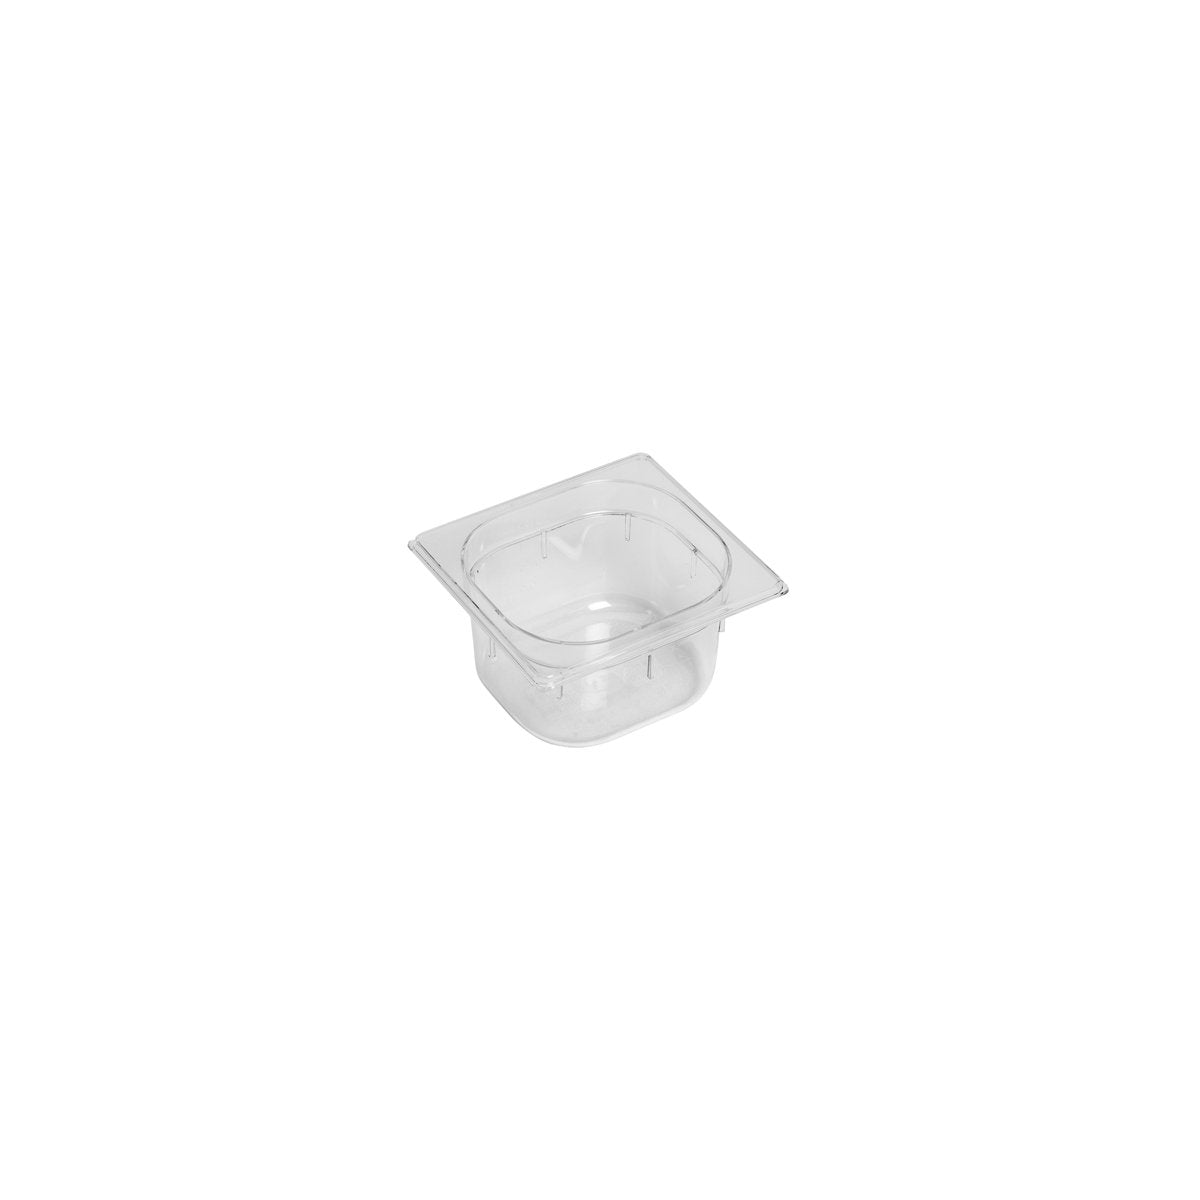 PC-16100CL Inox Macel Gastronorm Pan Polycarbonate Clear 1/6 Size 100mm Tomkin Australia Hospitality Supplies